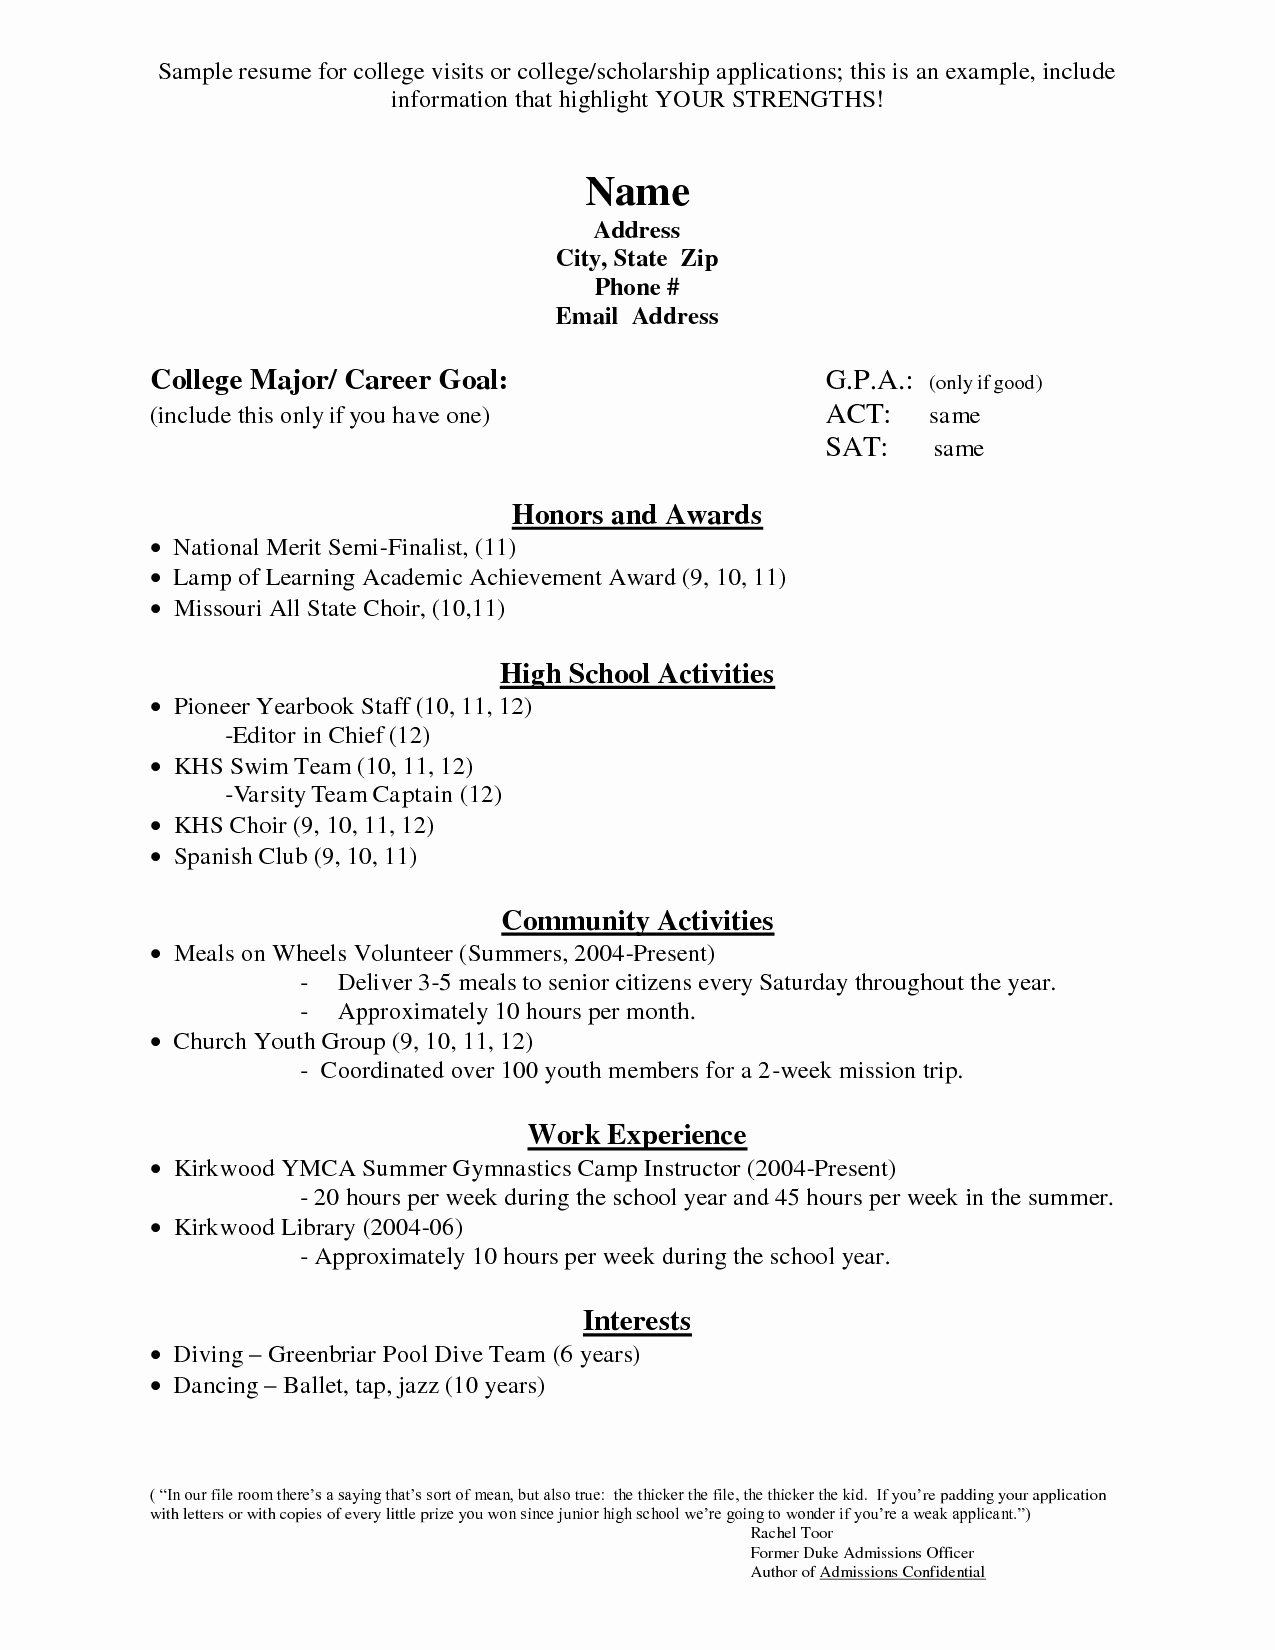 College Application Resume Examples Best Of College Application On Pinterest